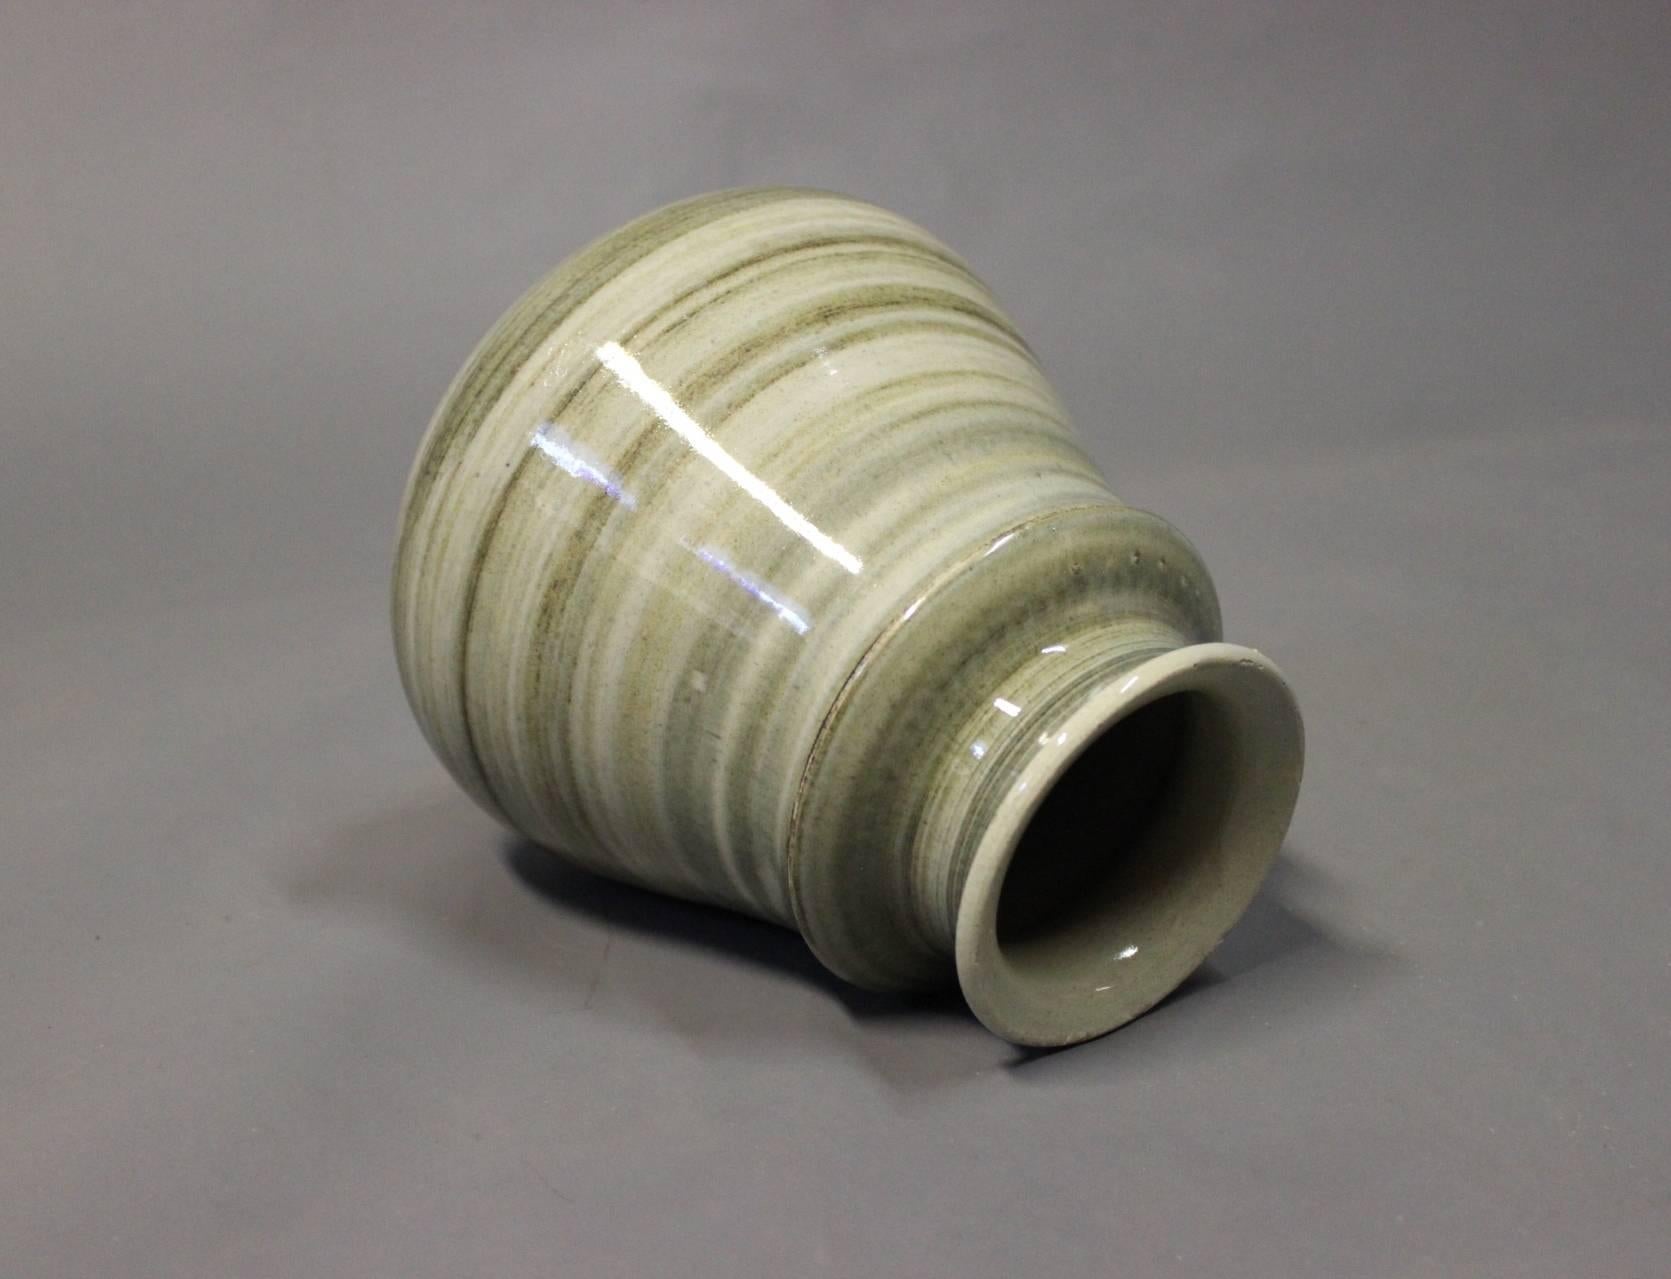 Ceramic vase with a green glaze by Höganäs from the 1960s. The vase is signed Claus Ivansson.